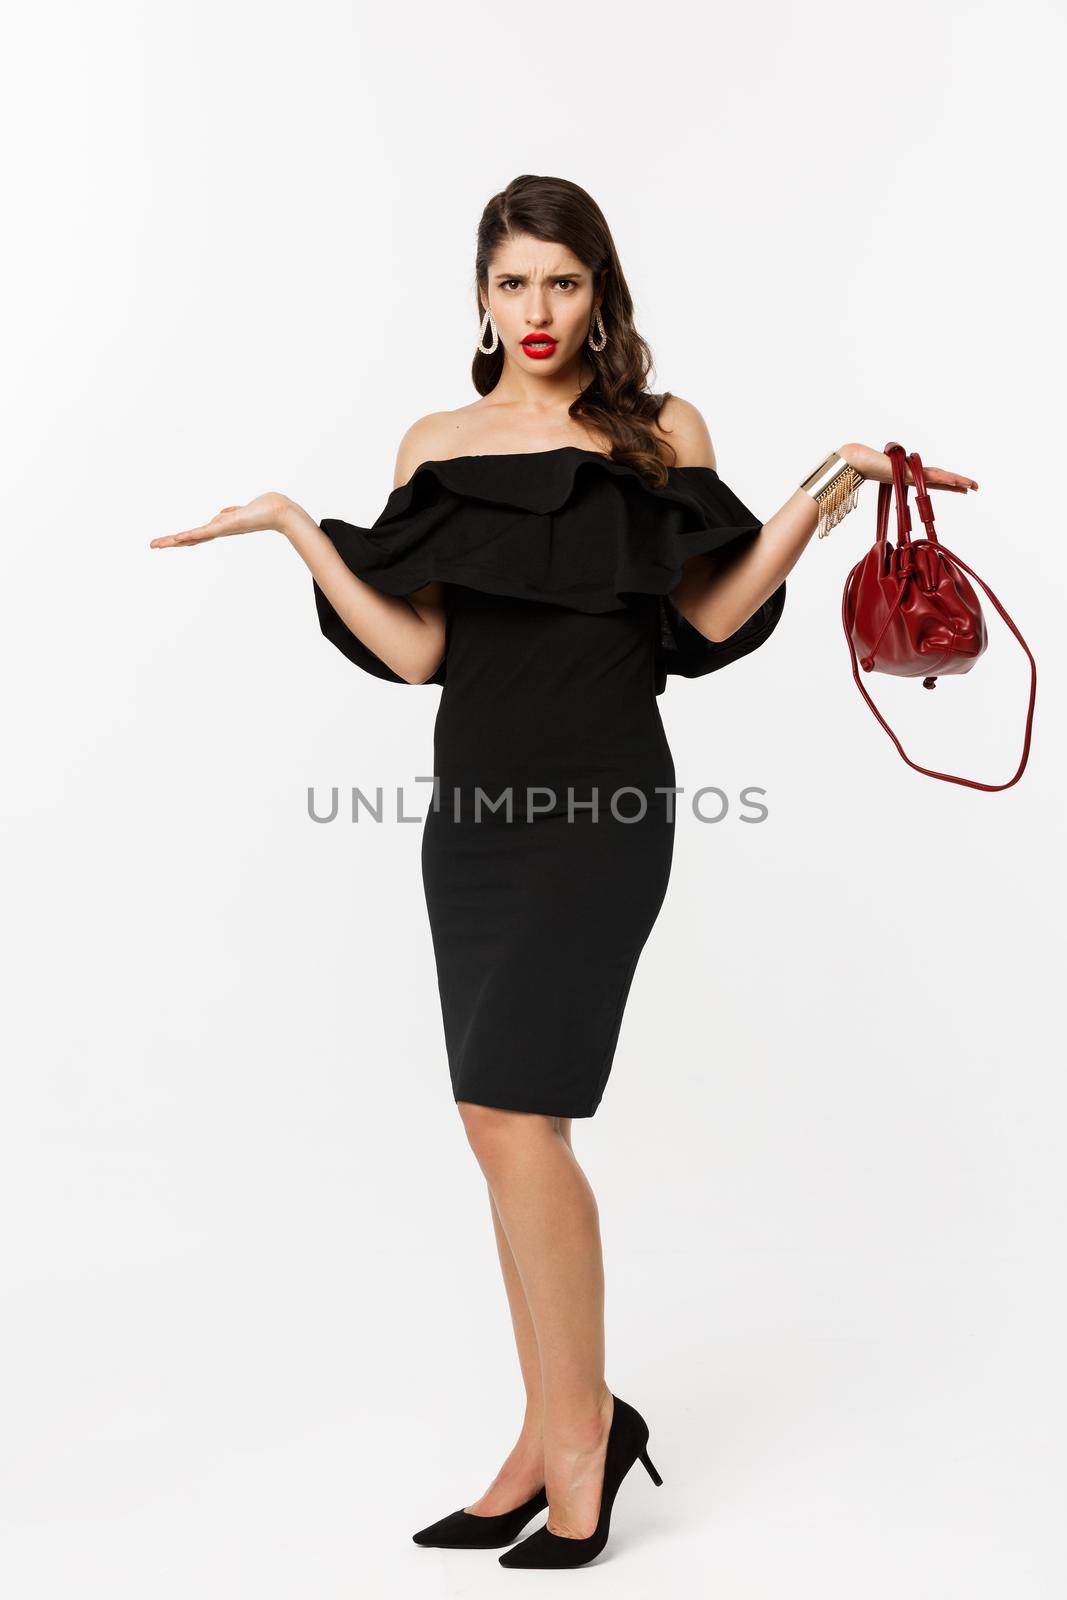 Beauty and fashion concept. Full length of disappointed glamour woman looking confused, raising hands up and staring puzzled, wearing party dress and high heels.